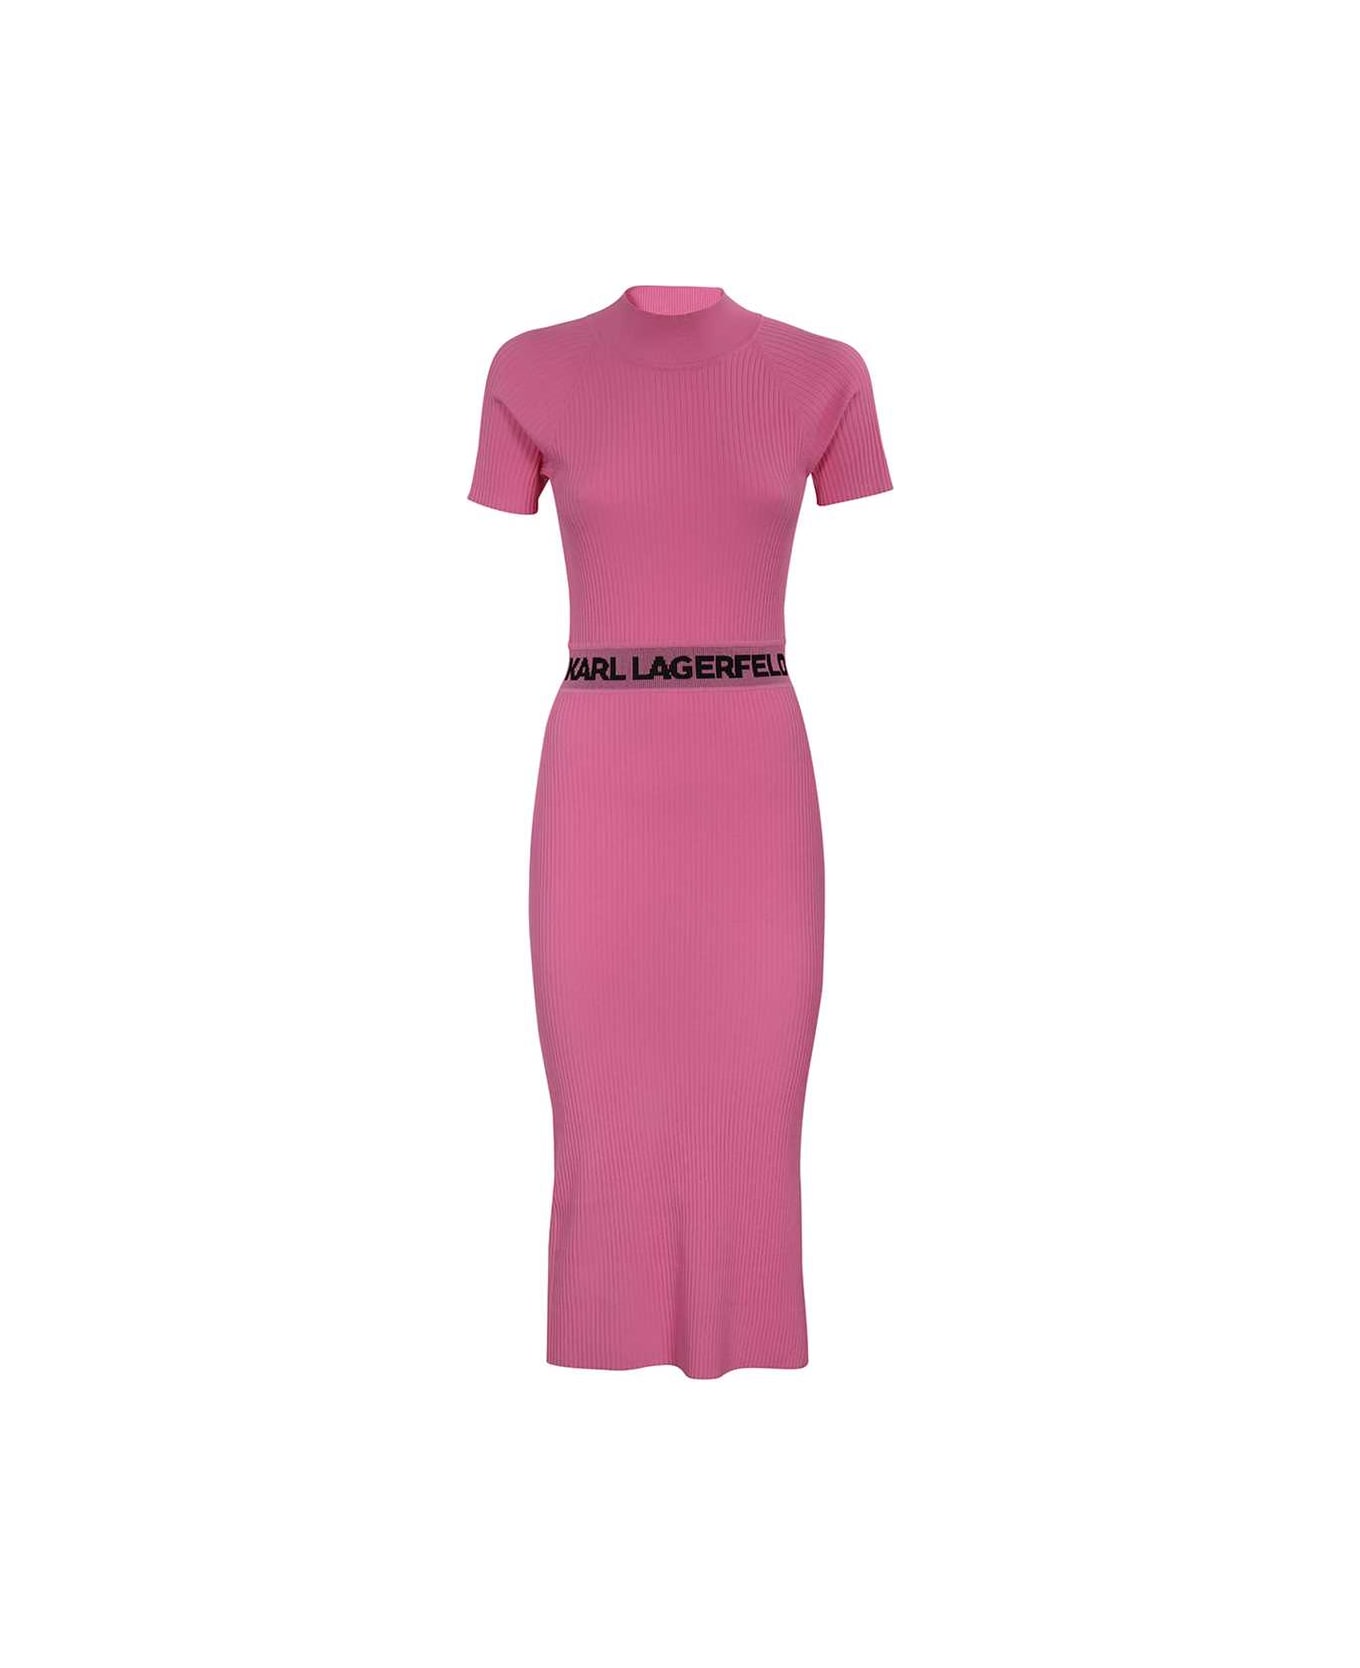 Karl Lagerfeld Knitted Dress - Pink